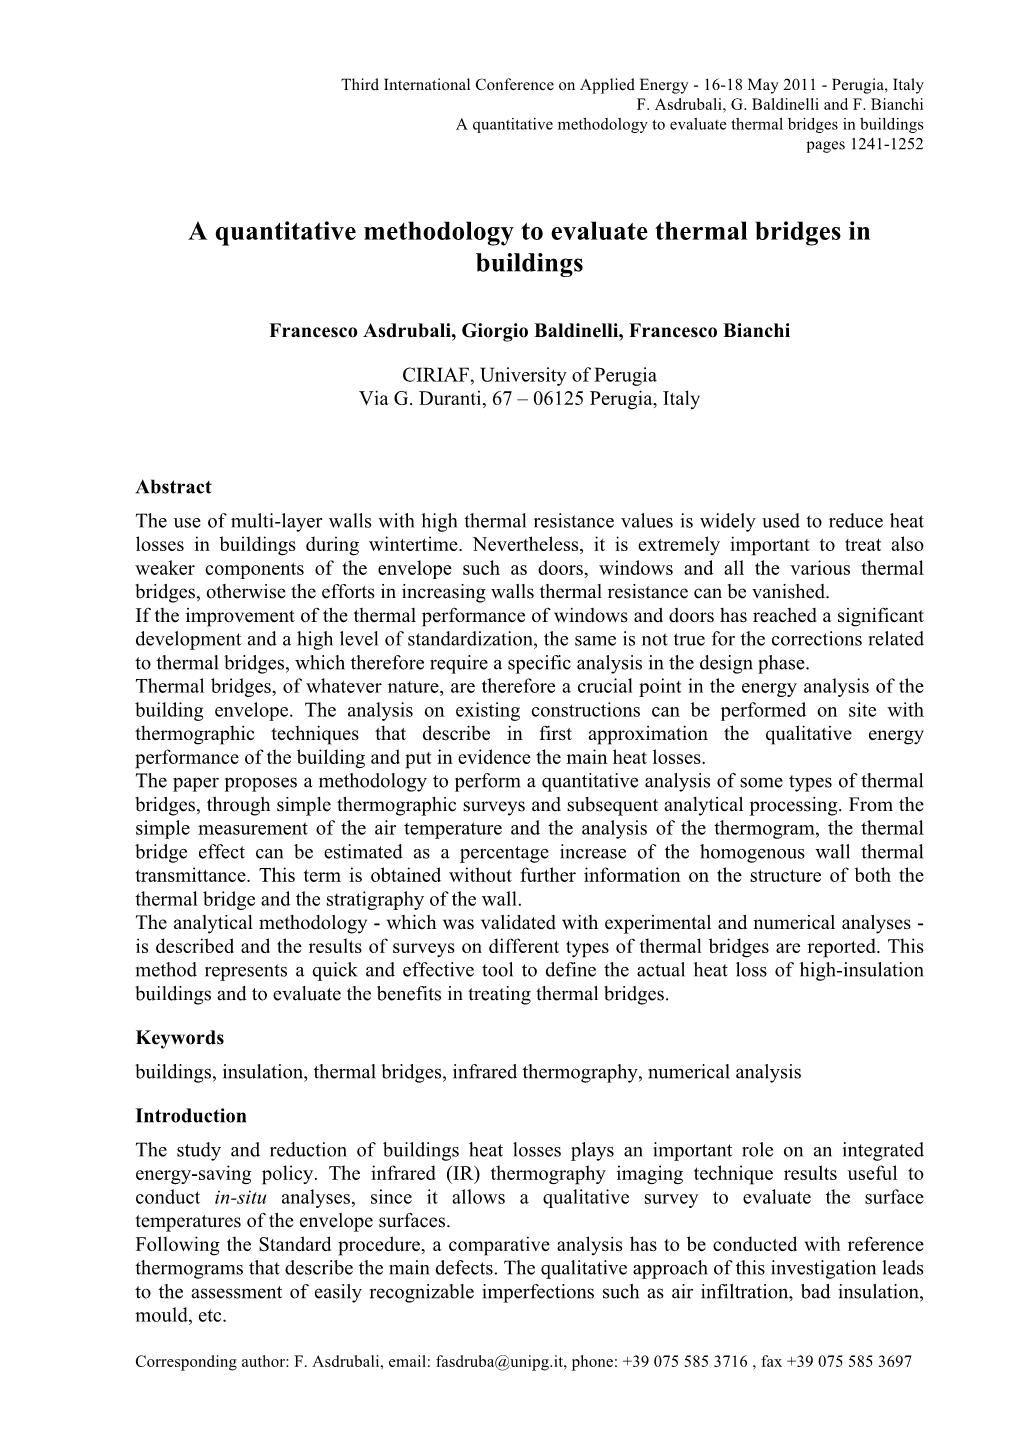 A Quantitative Methodology to Evaluate Thermal Bridges in Buildings Pages 1241-1252